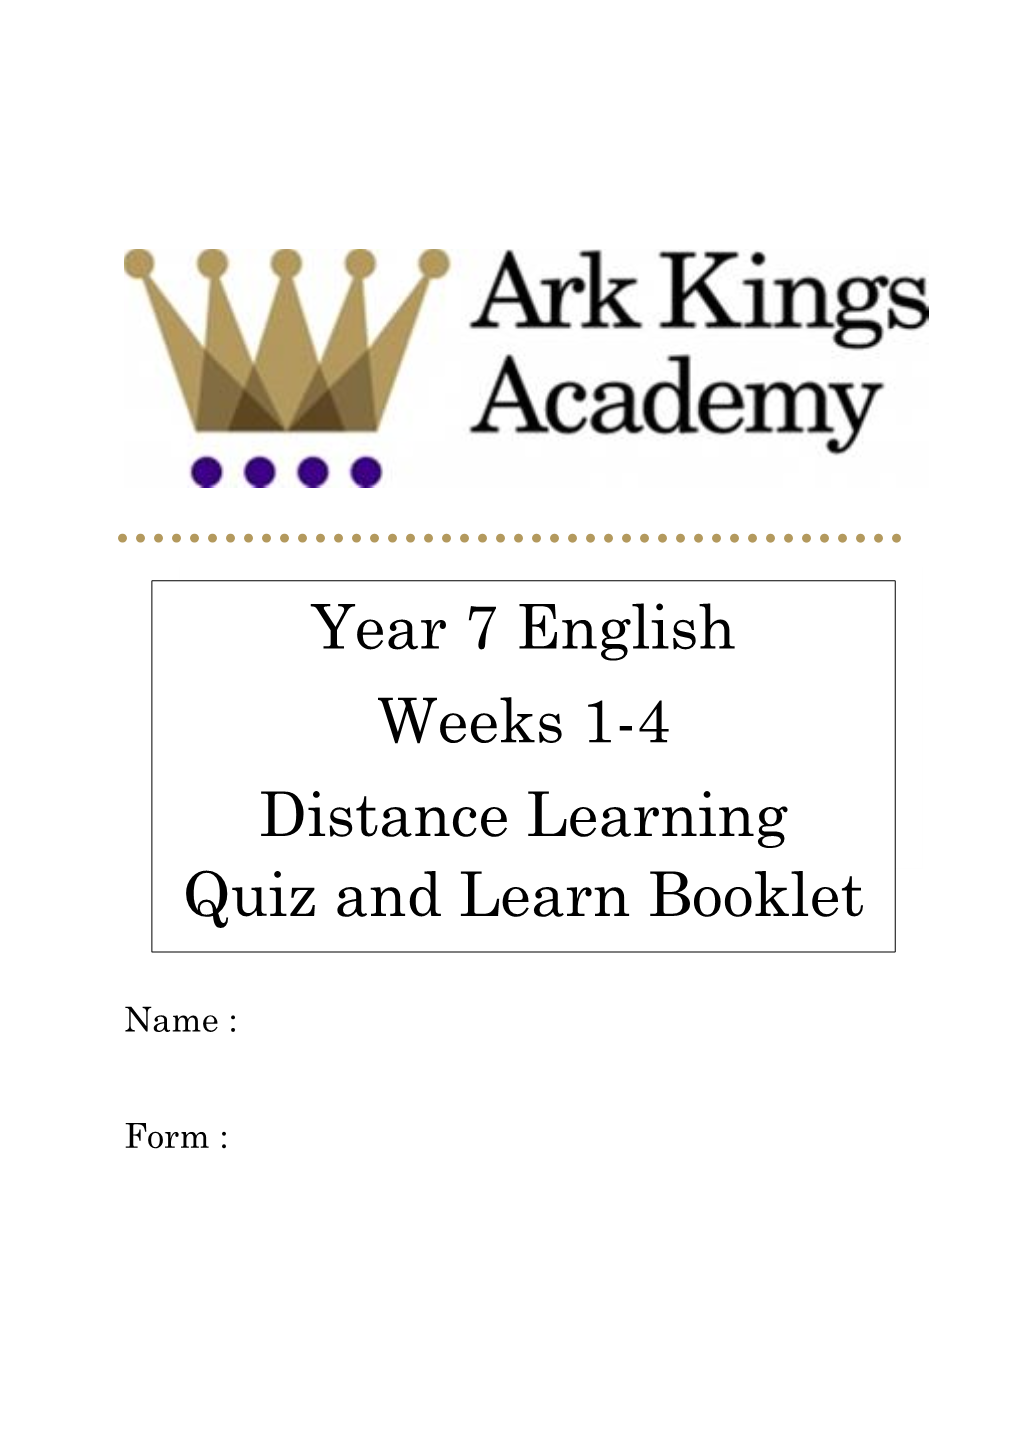 Year 7 English Weeks 1-4 Distance Learning Quiz and Learn Booklet Summer 2